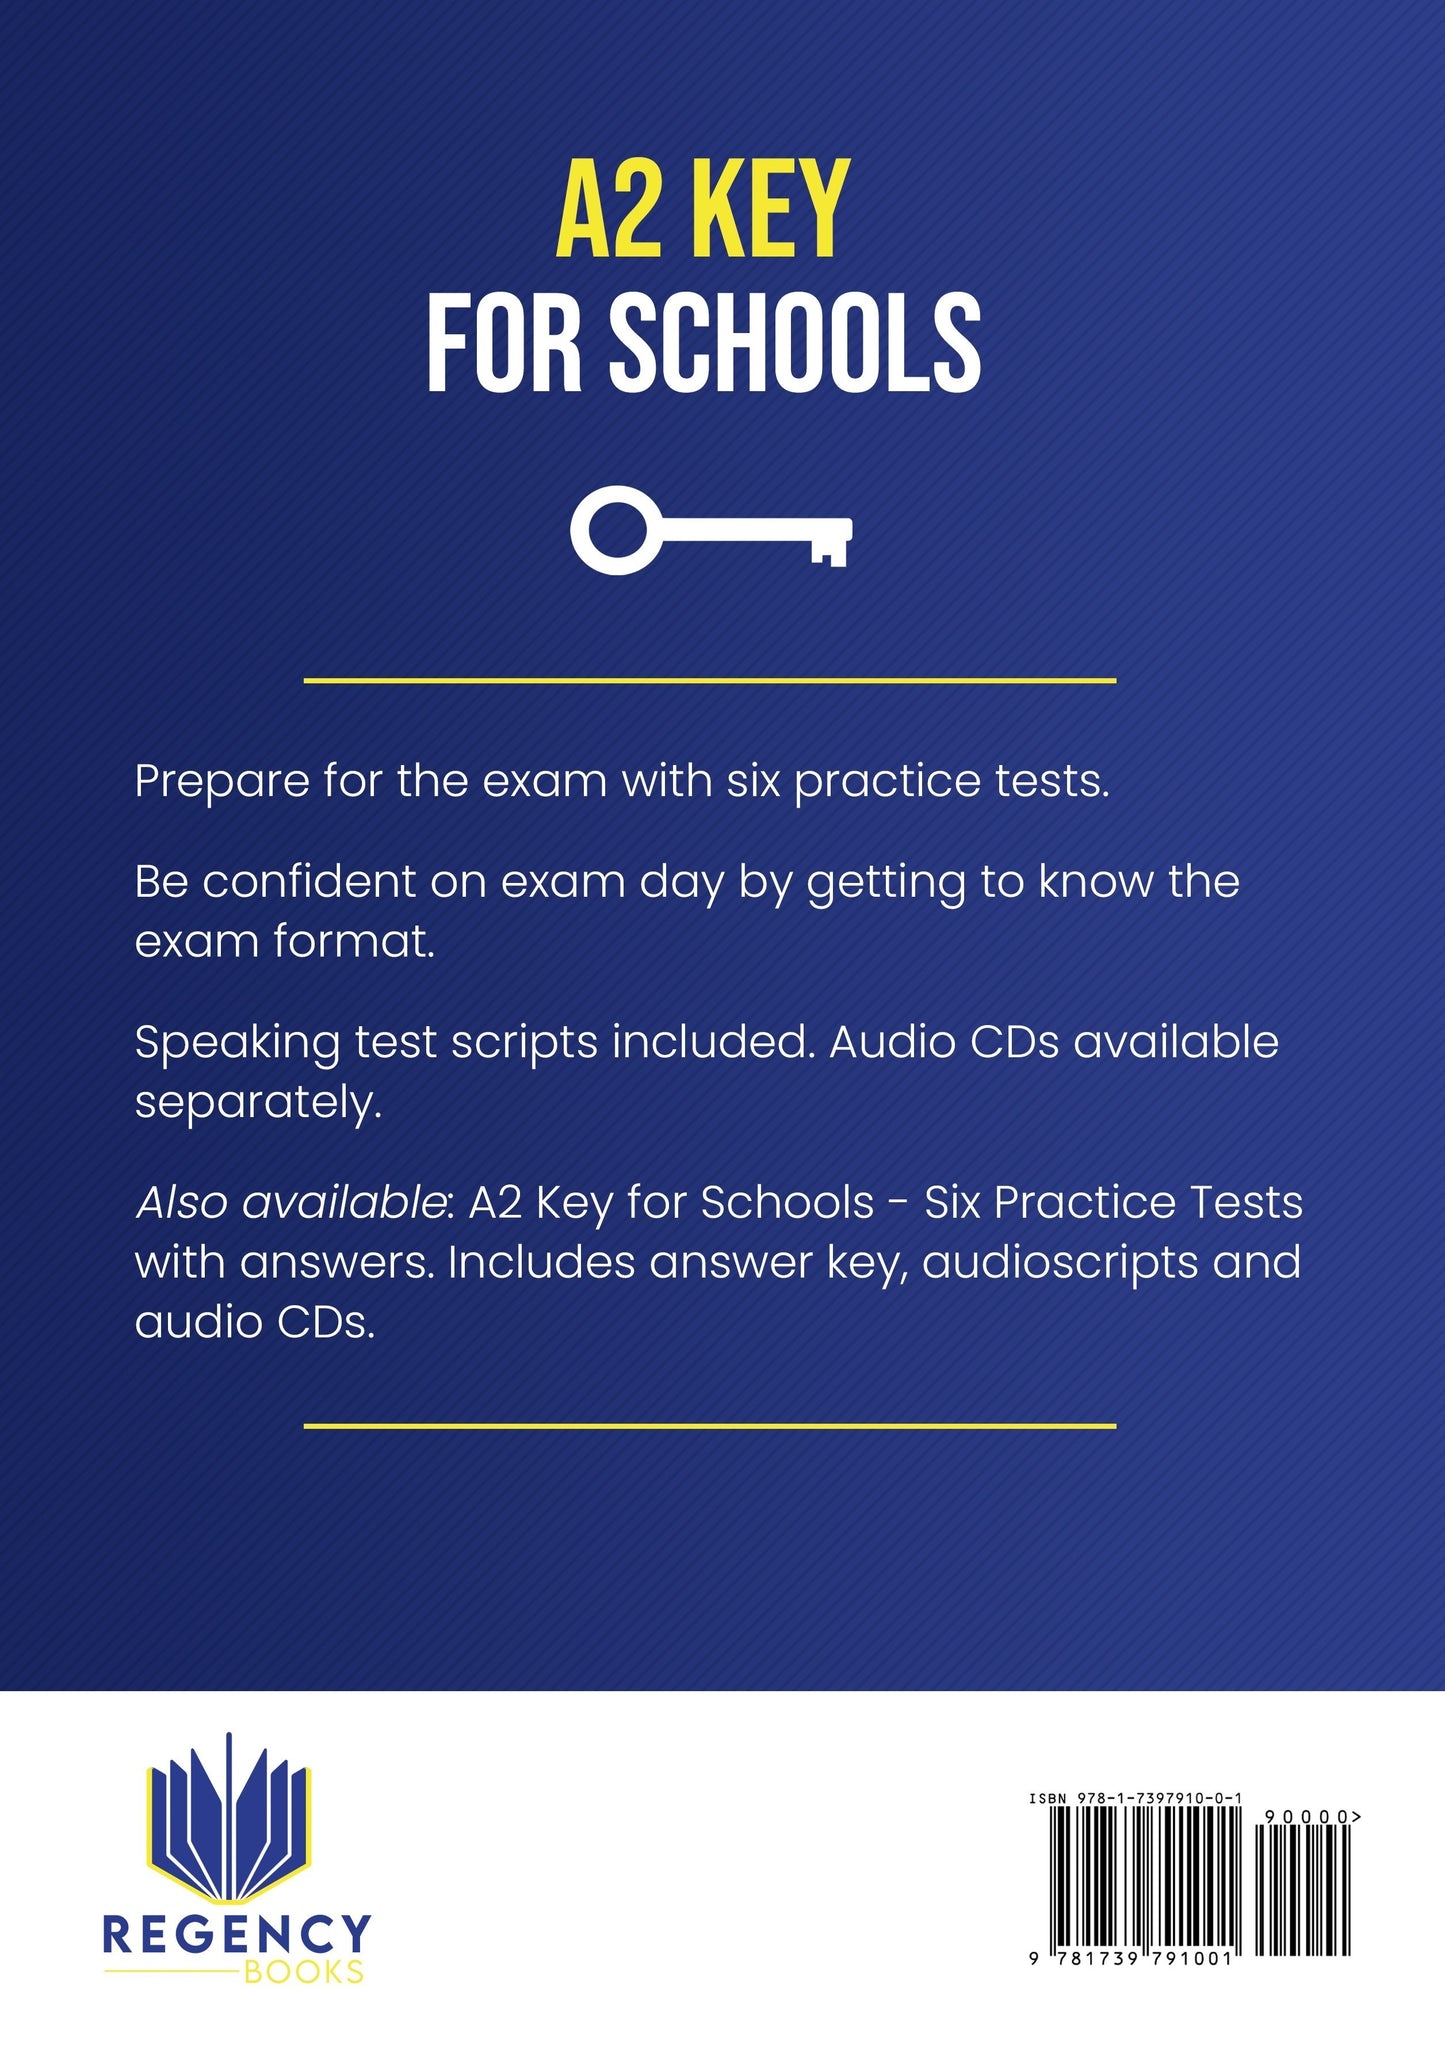 A2 Key for Schools - Six Practice Tests